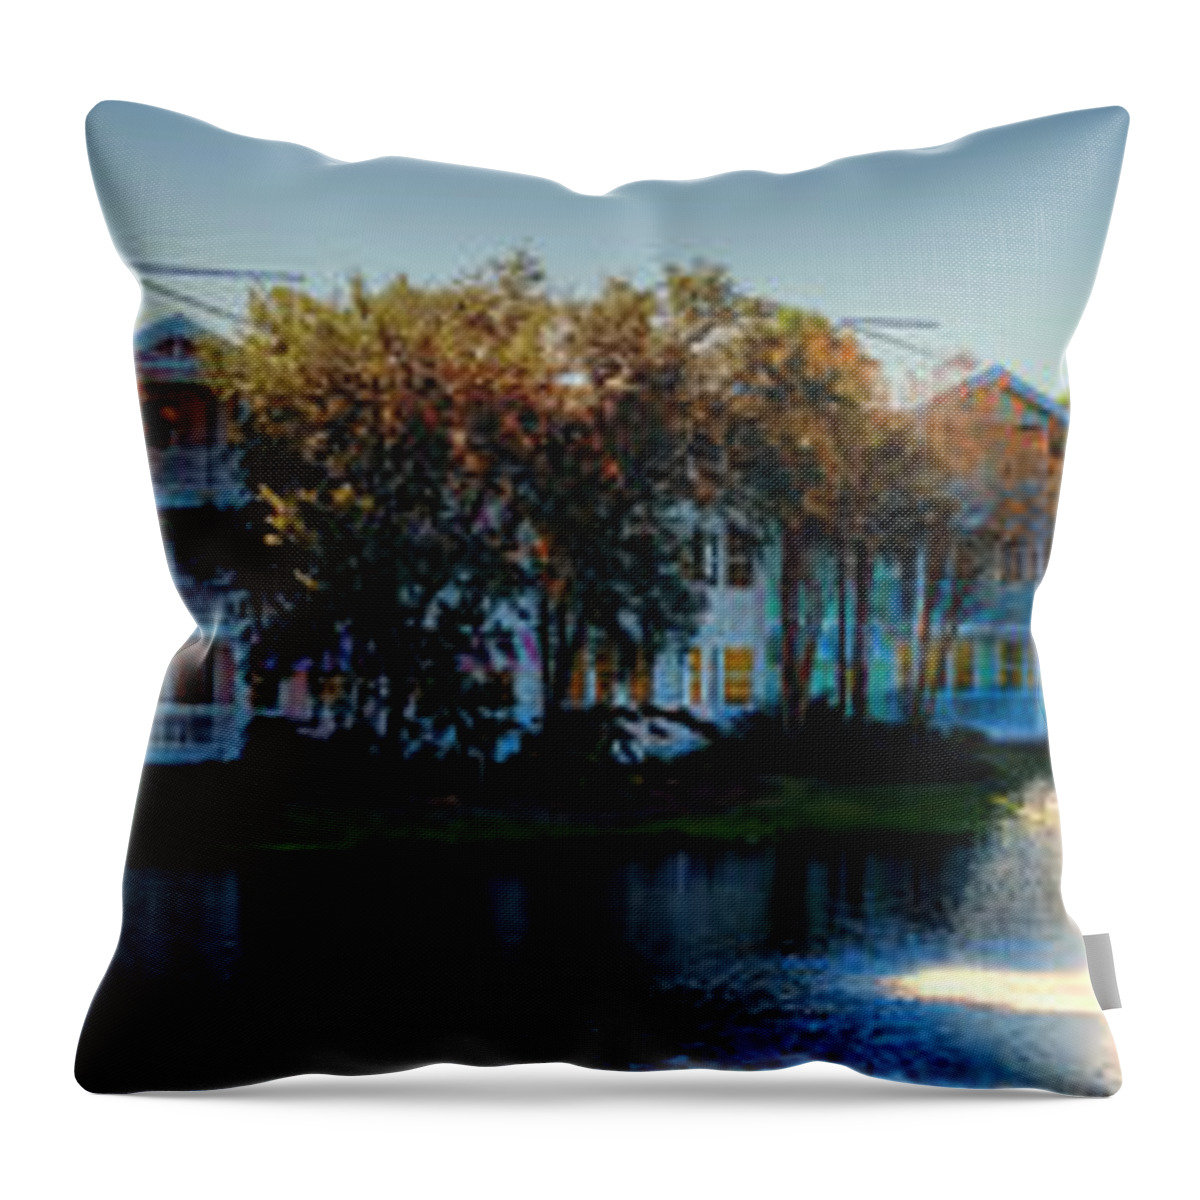 Ablaze Throw Pillow featuring the photograph Autumn At Old Key West Resort Panorama Walt Disney World by Thomas Woolworth